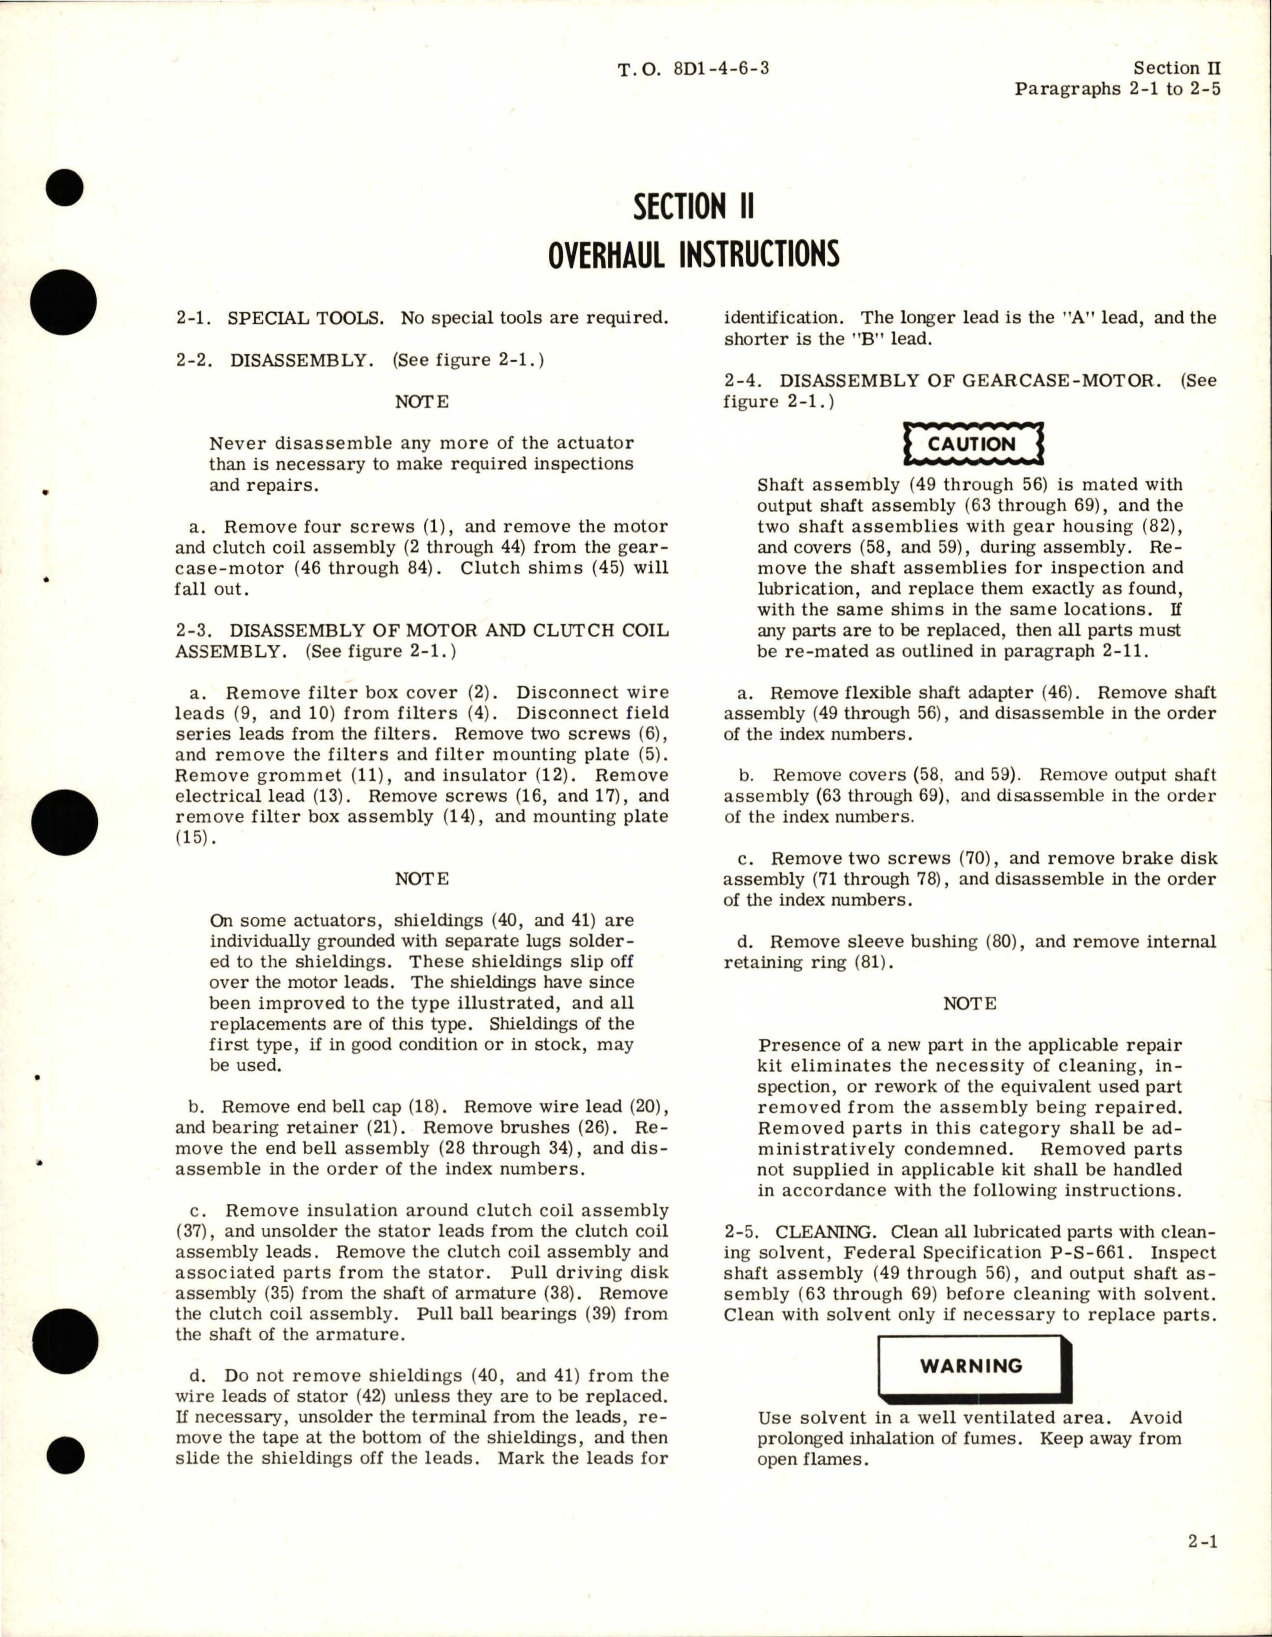 Sample page 5 from AirCorps Library document: Overhaul for Electro-Mechanical Rotary Actuator - Parts C824C and C824C1